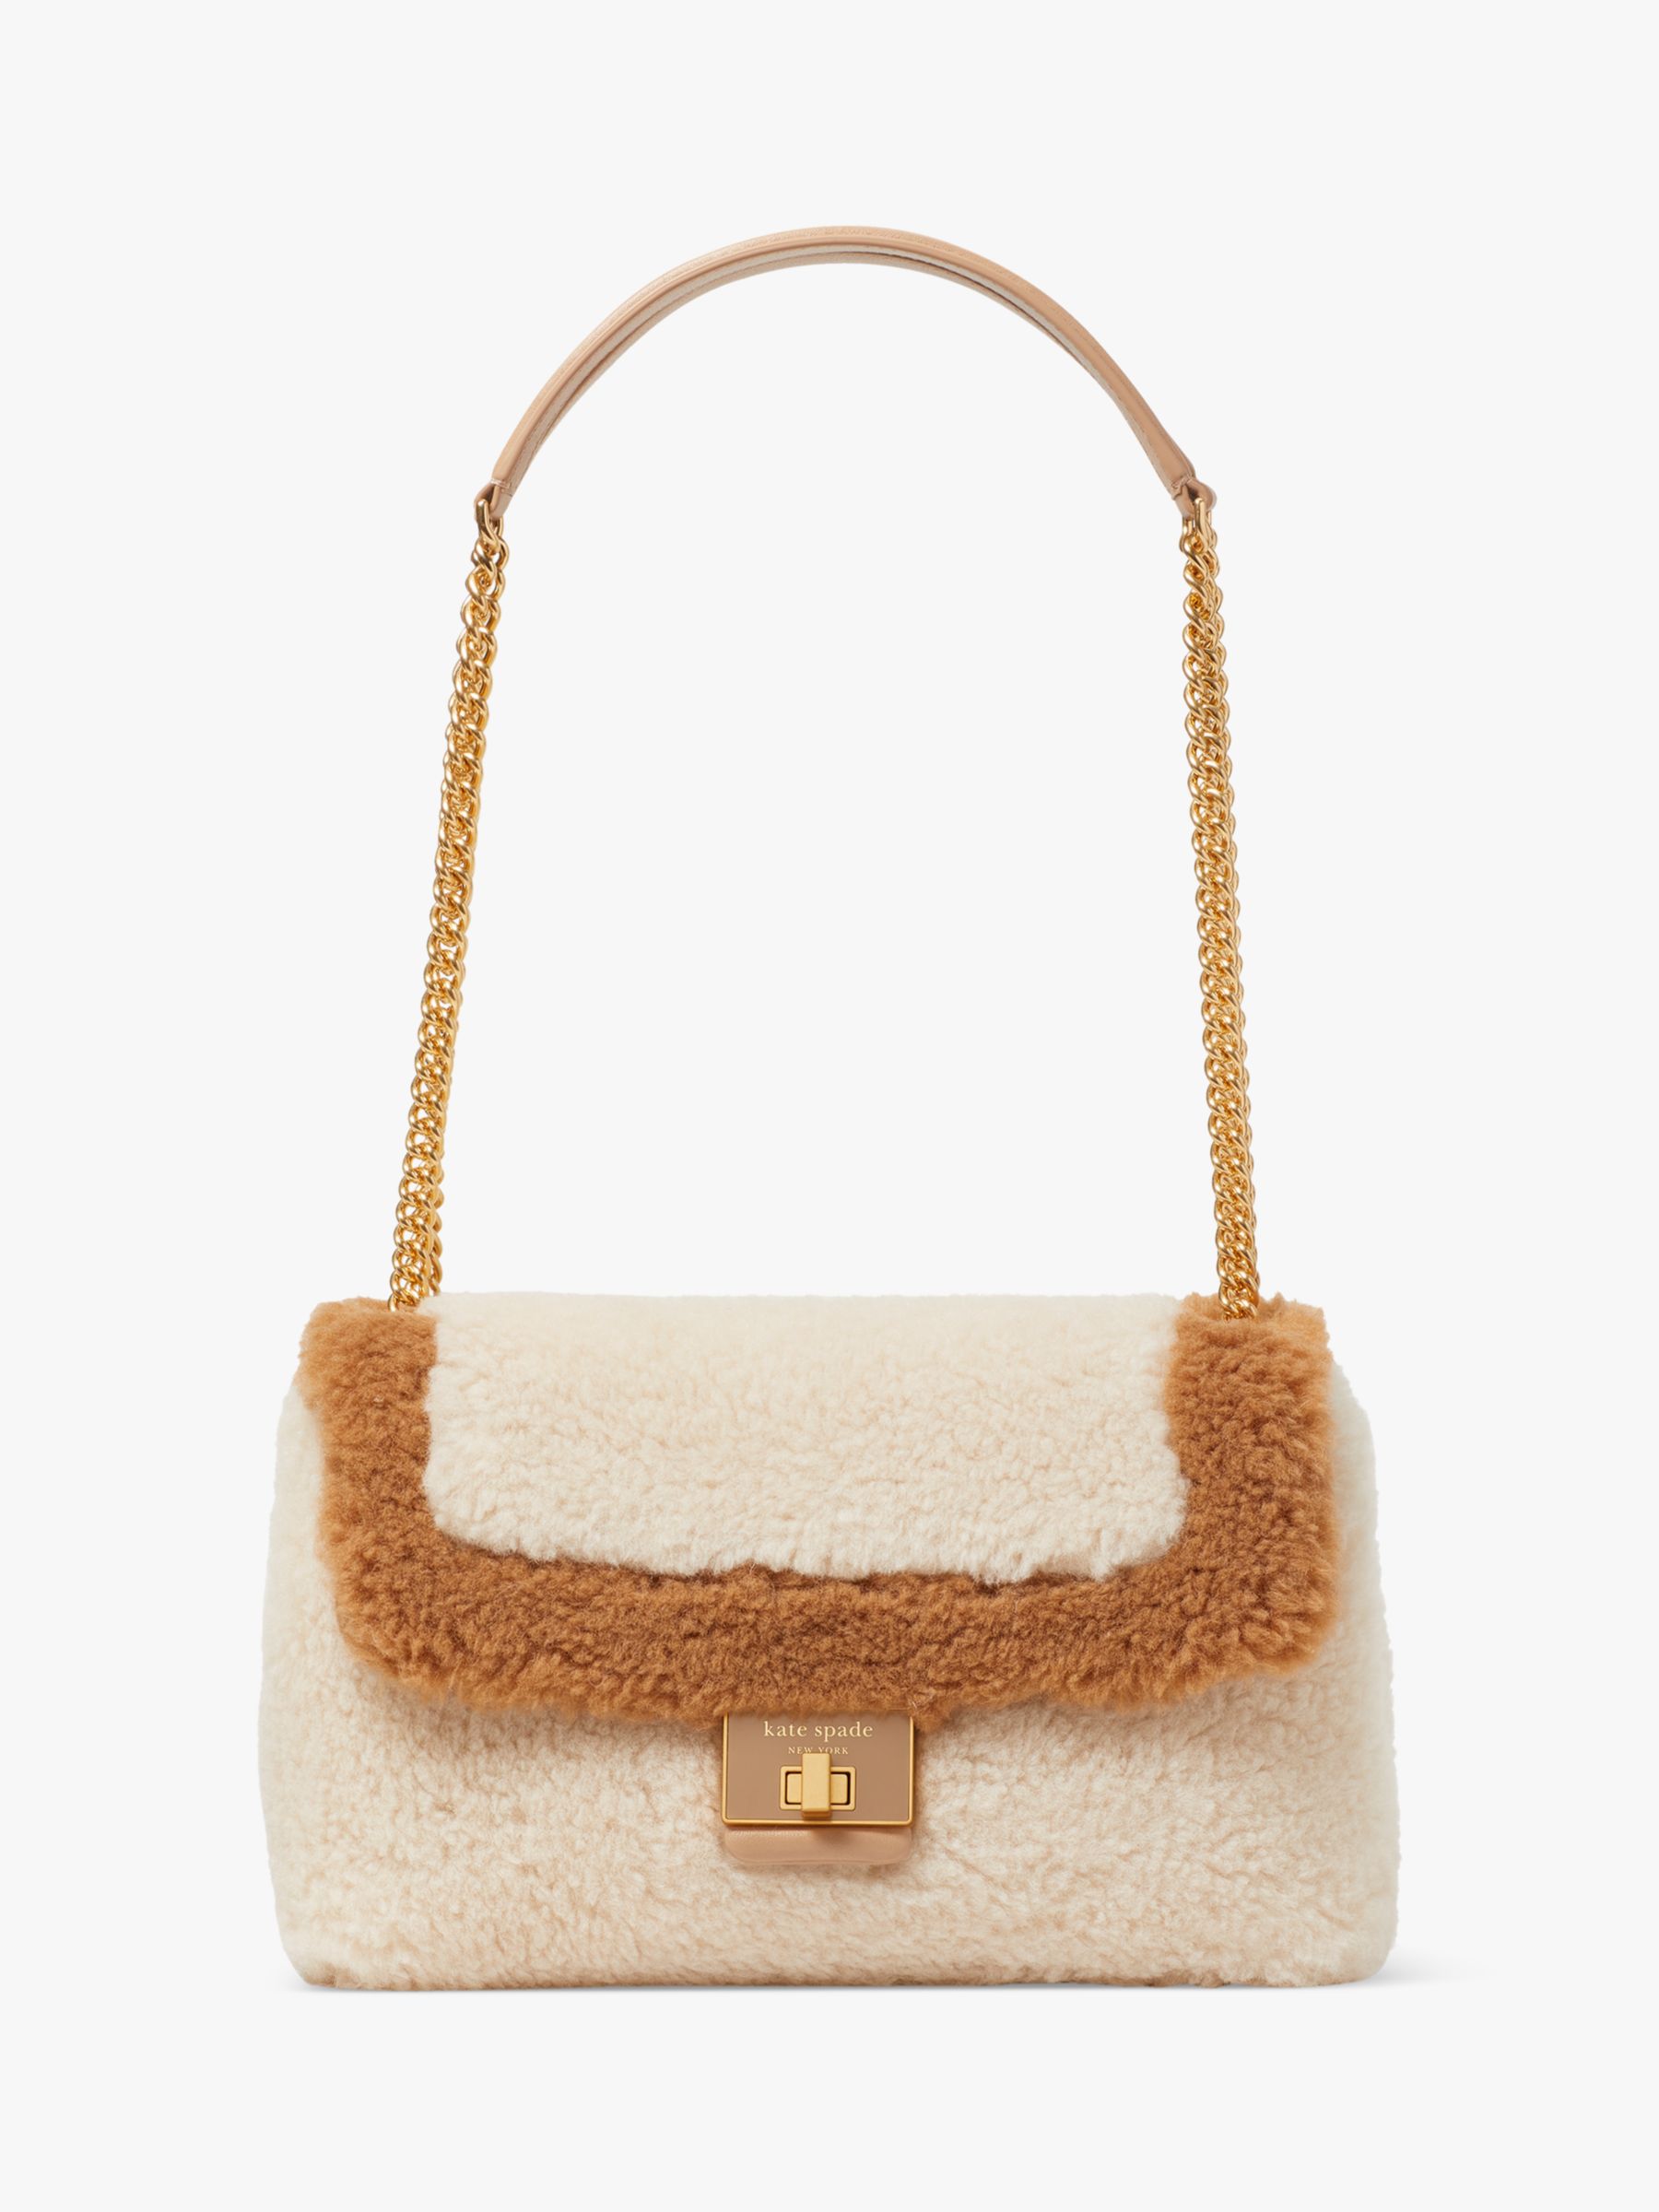 kate spade new york Evelyn Faux Shearling Chain Strap Shoulder Bag,  Cream/Multi at John Lewis & Partners